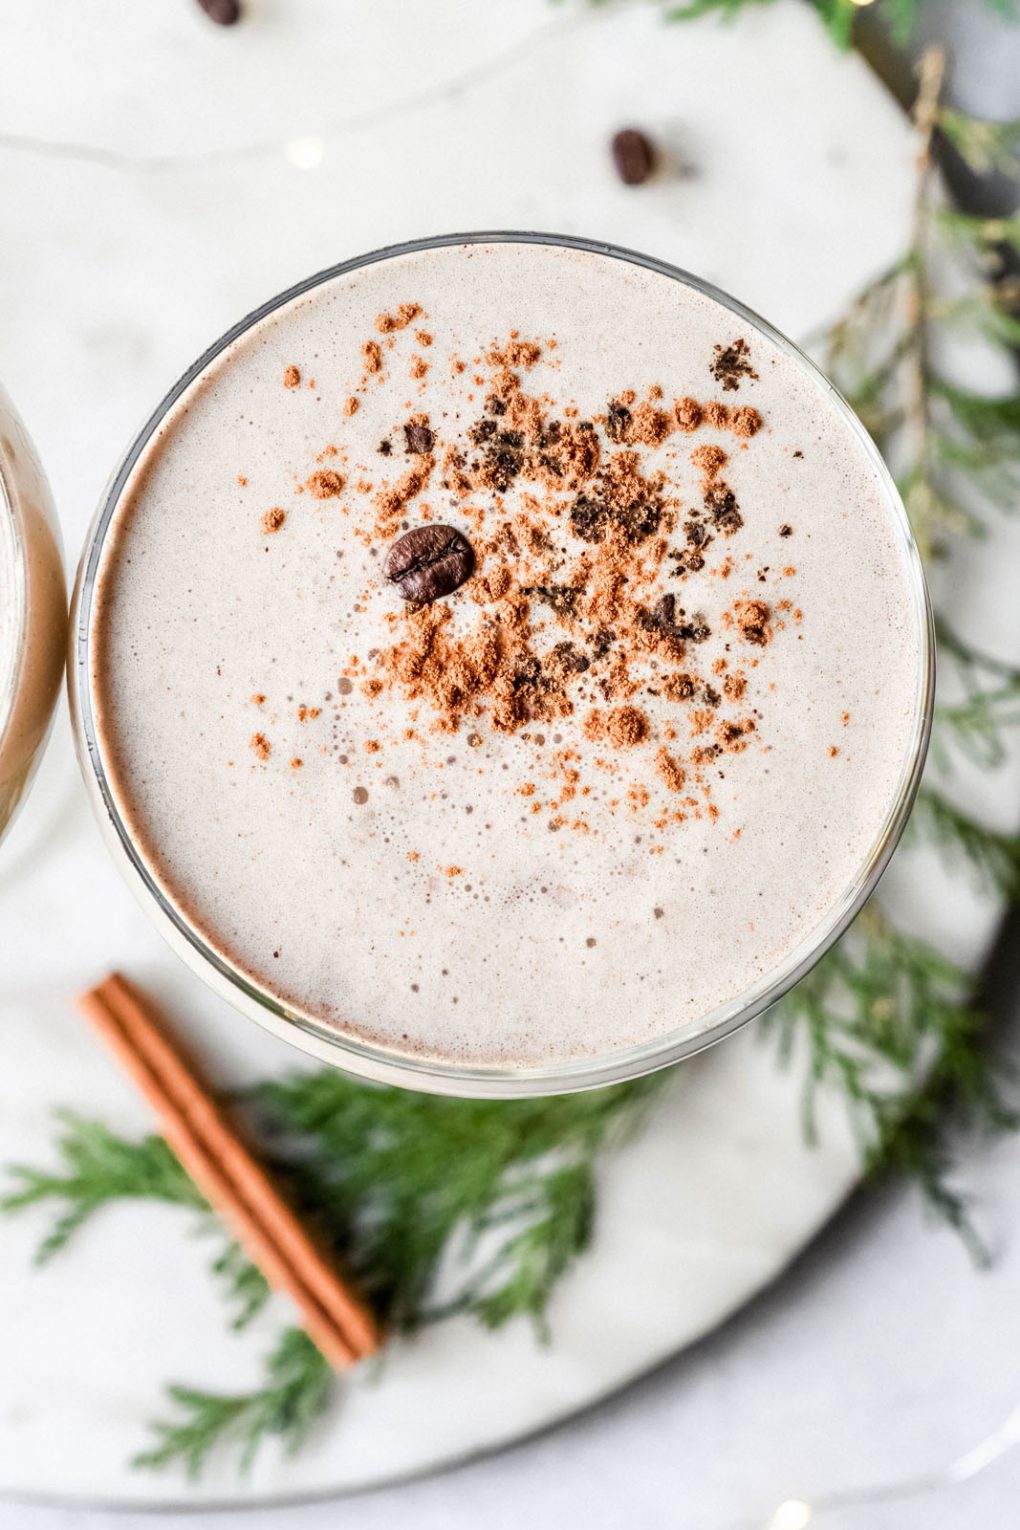 Overhead shot of a creamy eggnog espresso martini in a coupe glass. Topped with a dash of cinnamon and a coffee bean. On a white background surrounded by cedar, and pine cones.